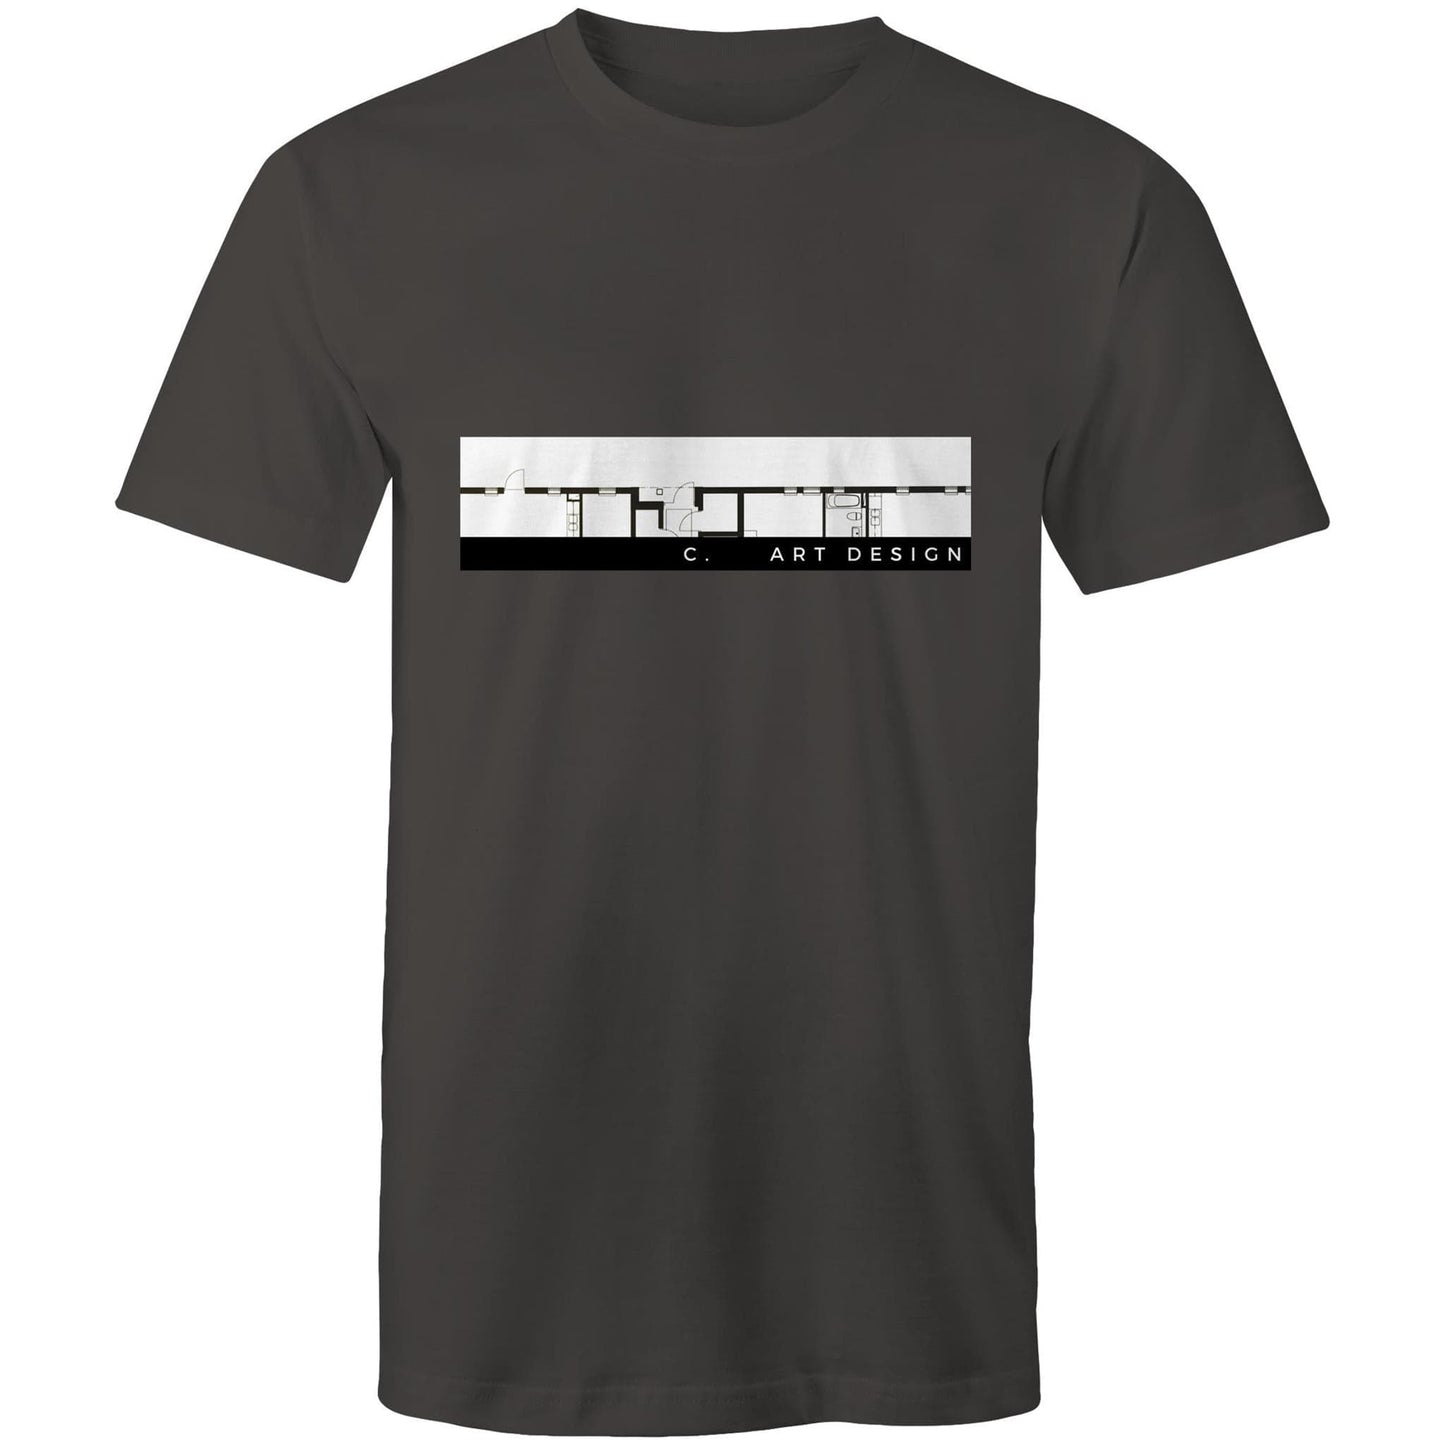 Charcoal / Small C. Art Design - Architectural Map T-Shirt